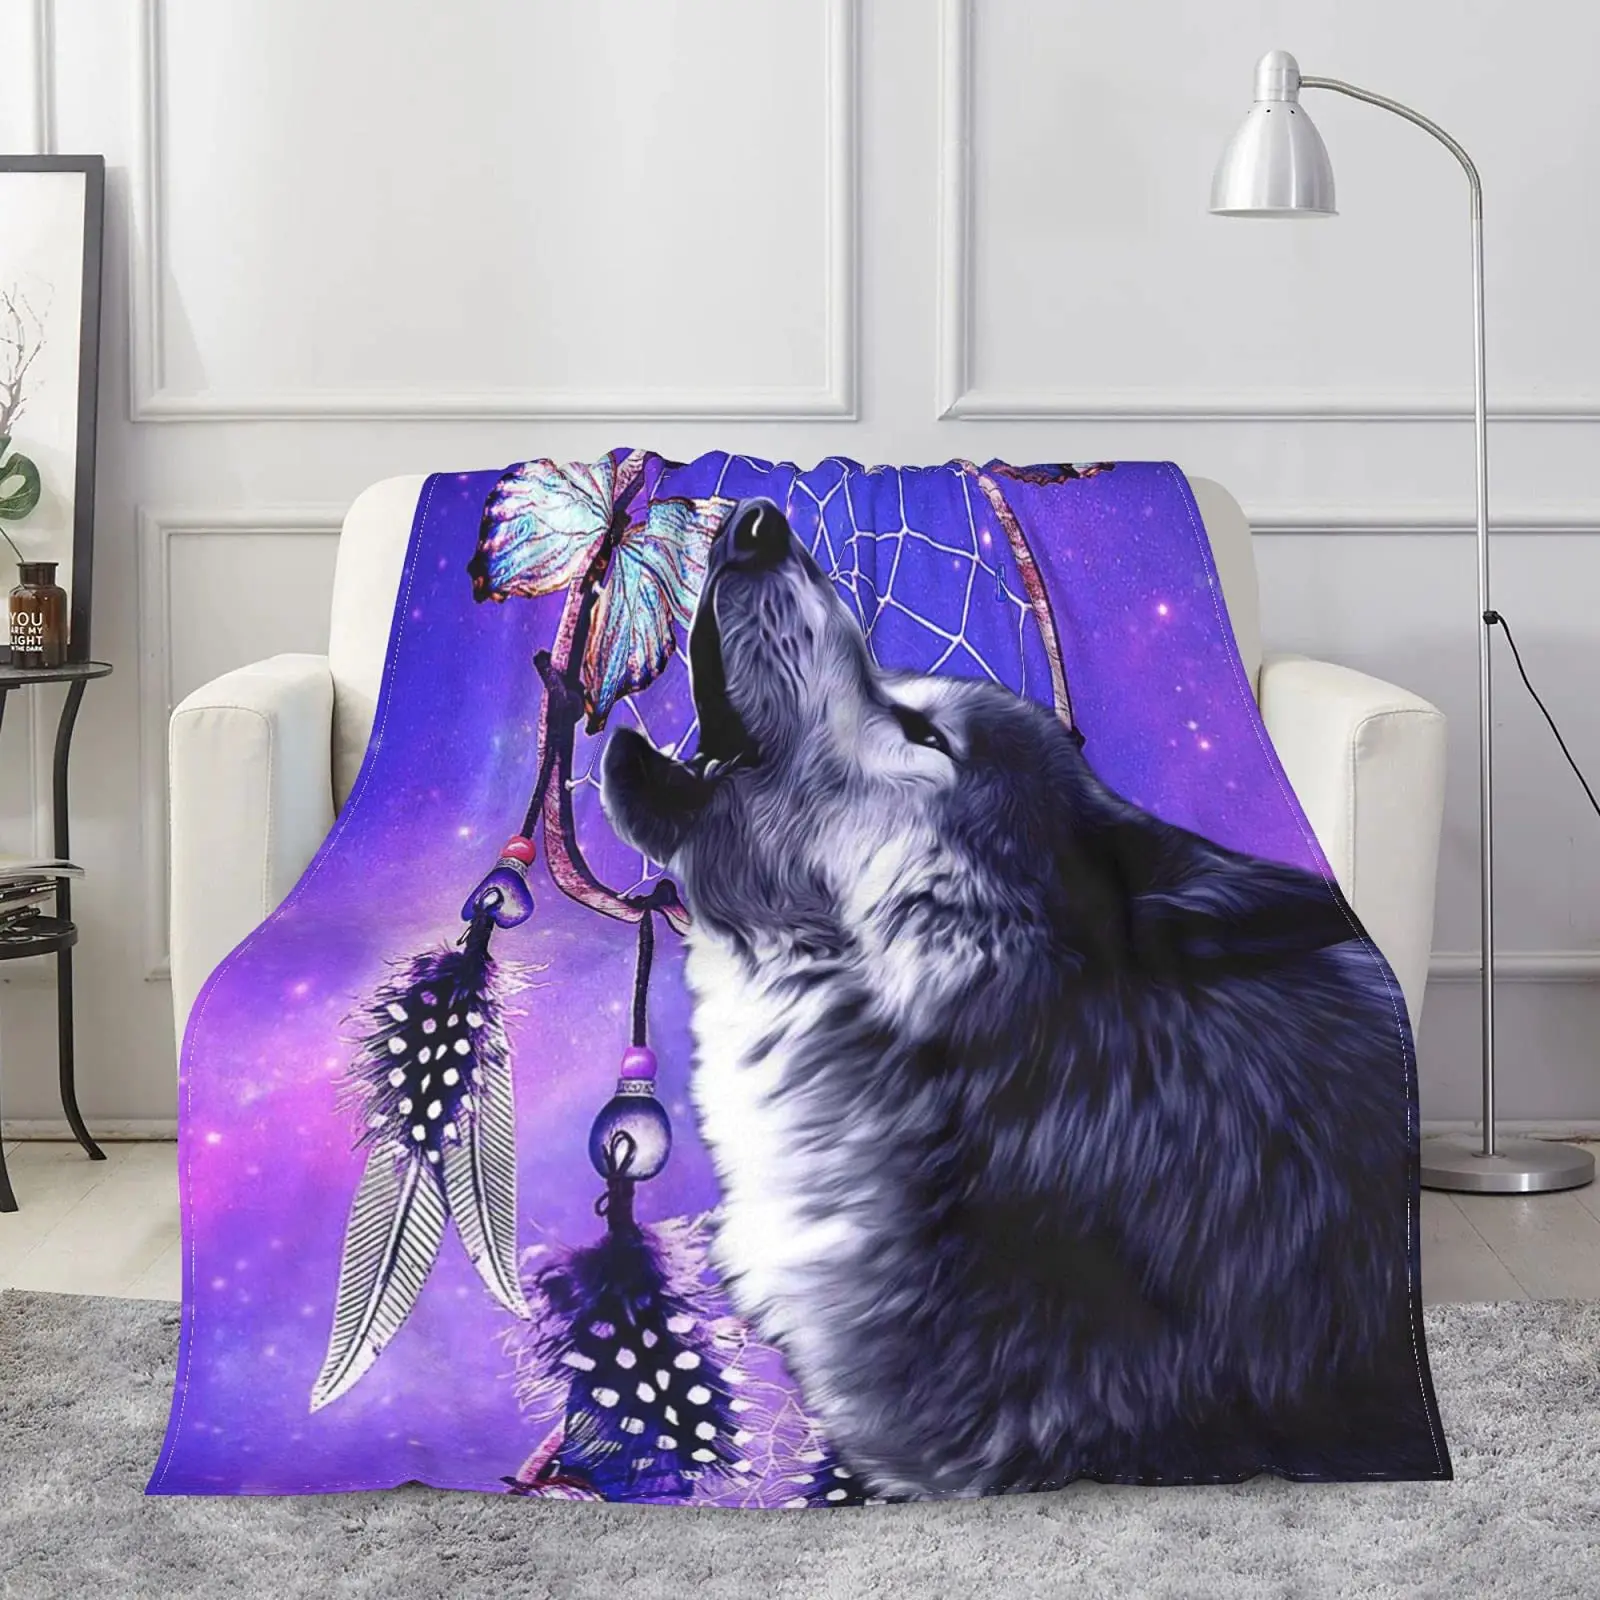 

Celestial Wolf Flannel Throw Blanket Anti-Pilling Cozy Bed Blanket Lightweight Warm Microfiber Blanket for Couch/Bed/Sofa/Office